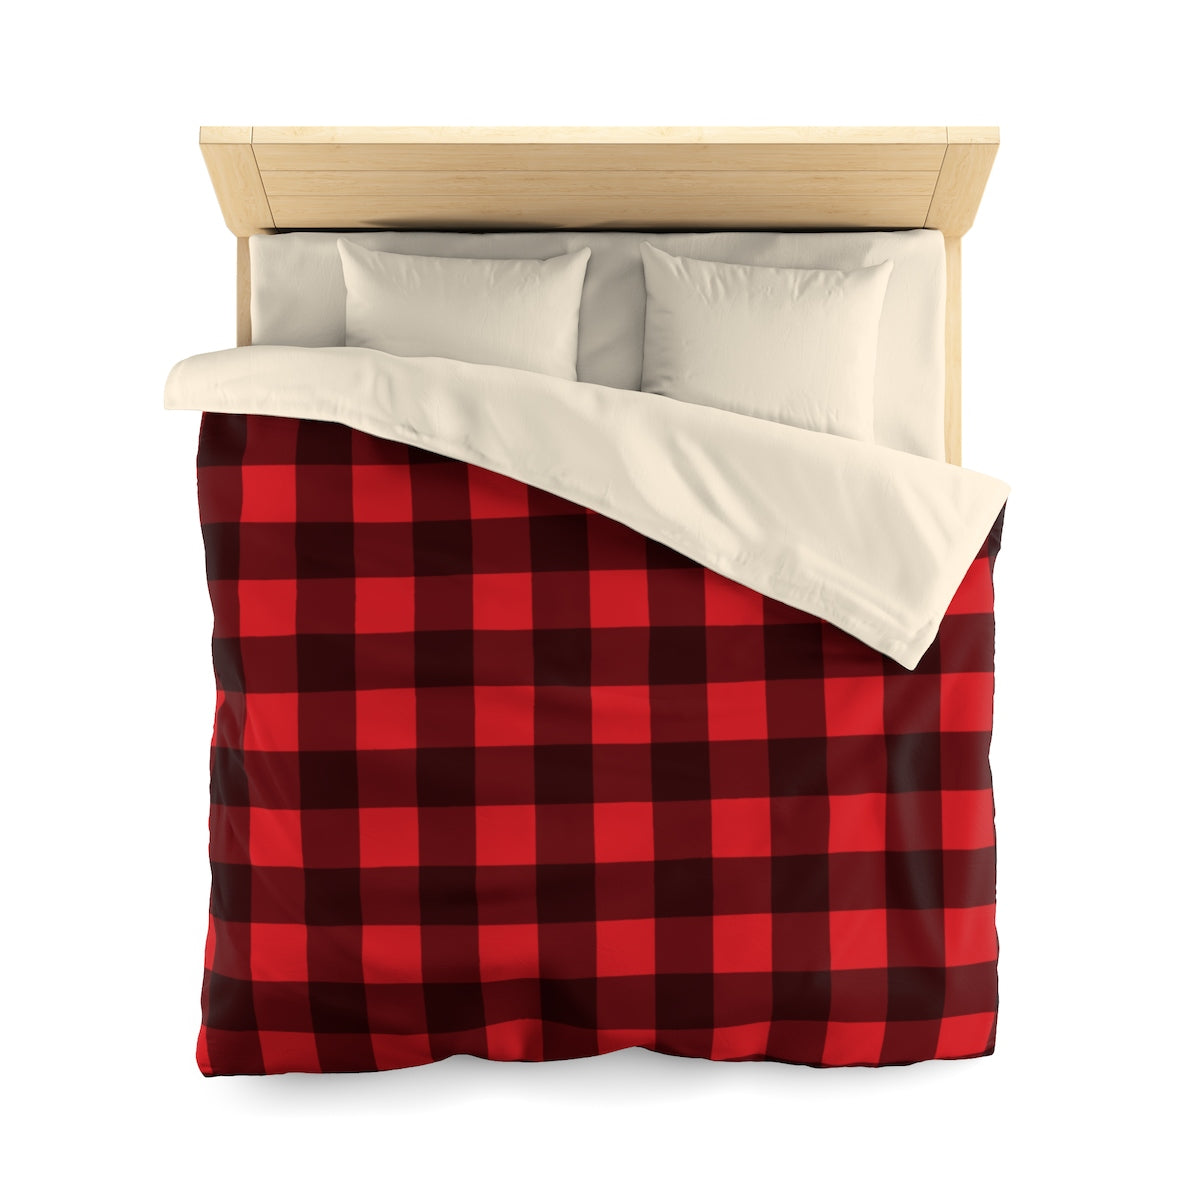 Buffalo Plaid Duvet Cover, Red Black Check Lumberjack Microfiber Full Queen Twin Bed Cover Home Bedding Starcove Fashion